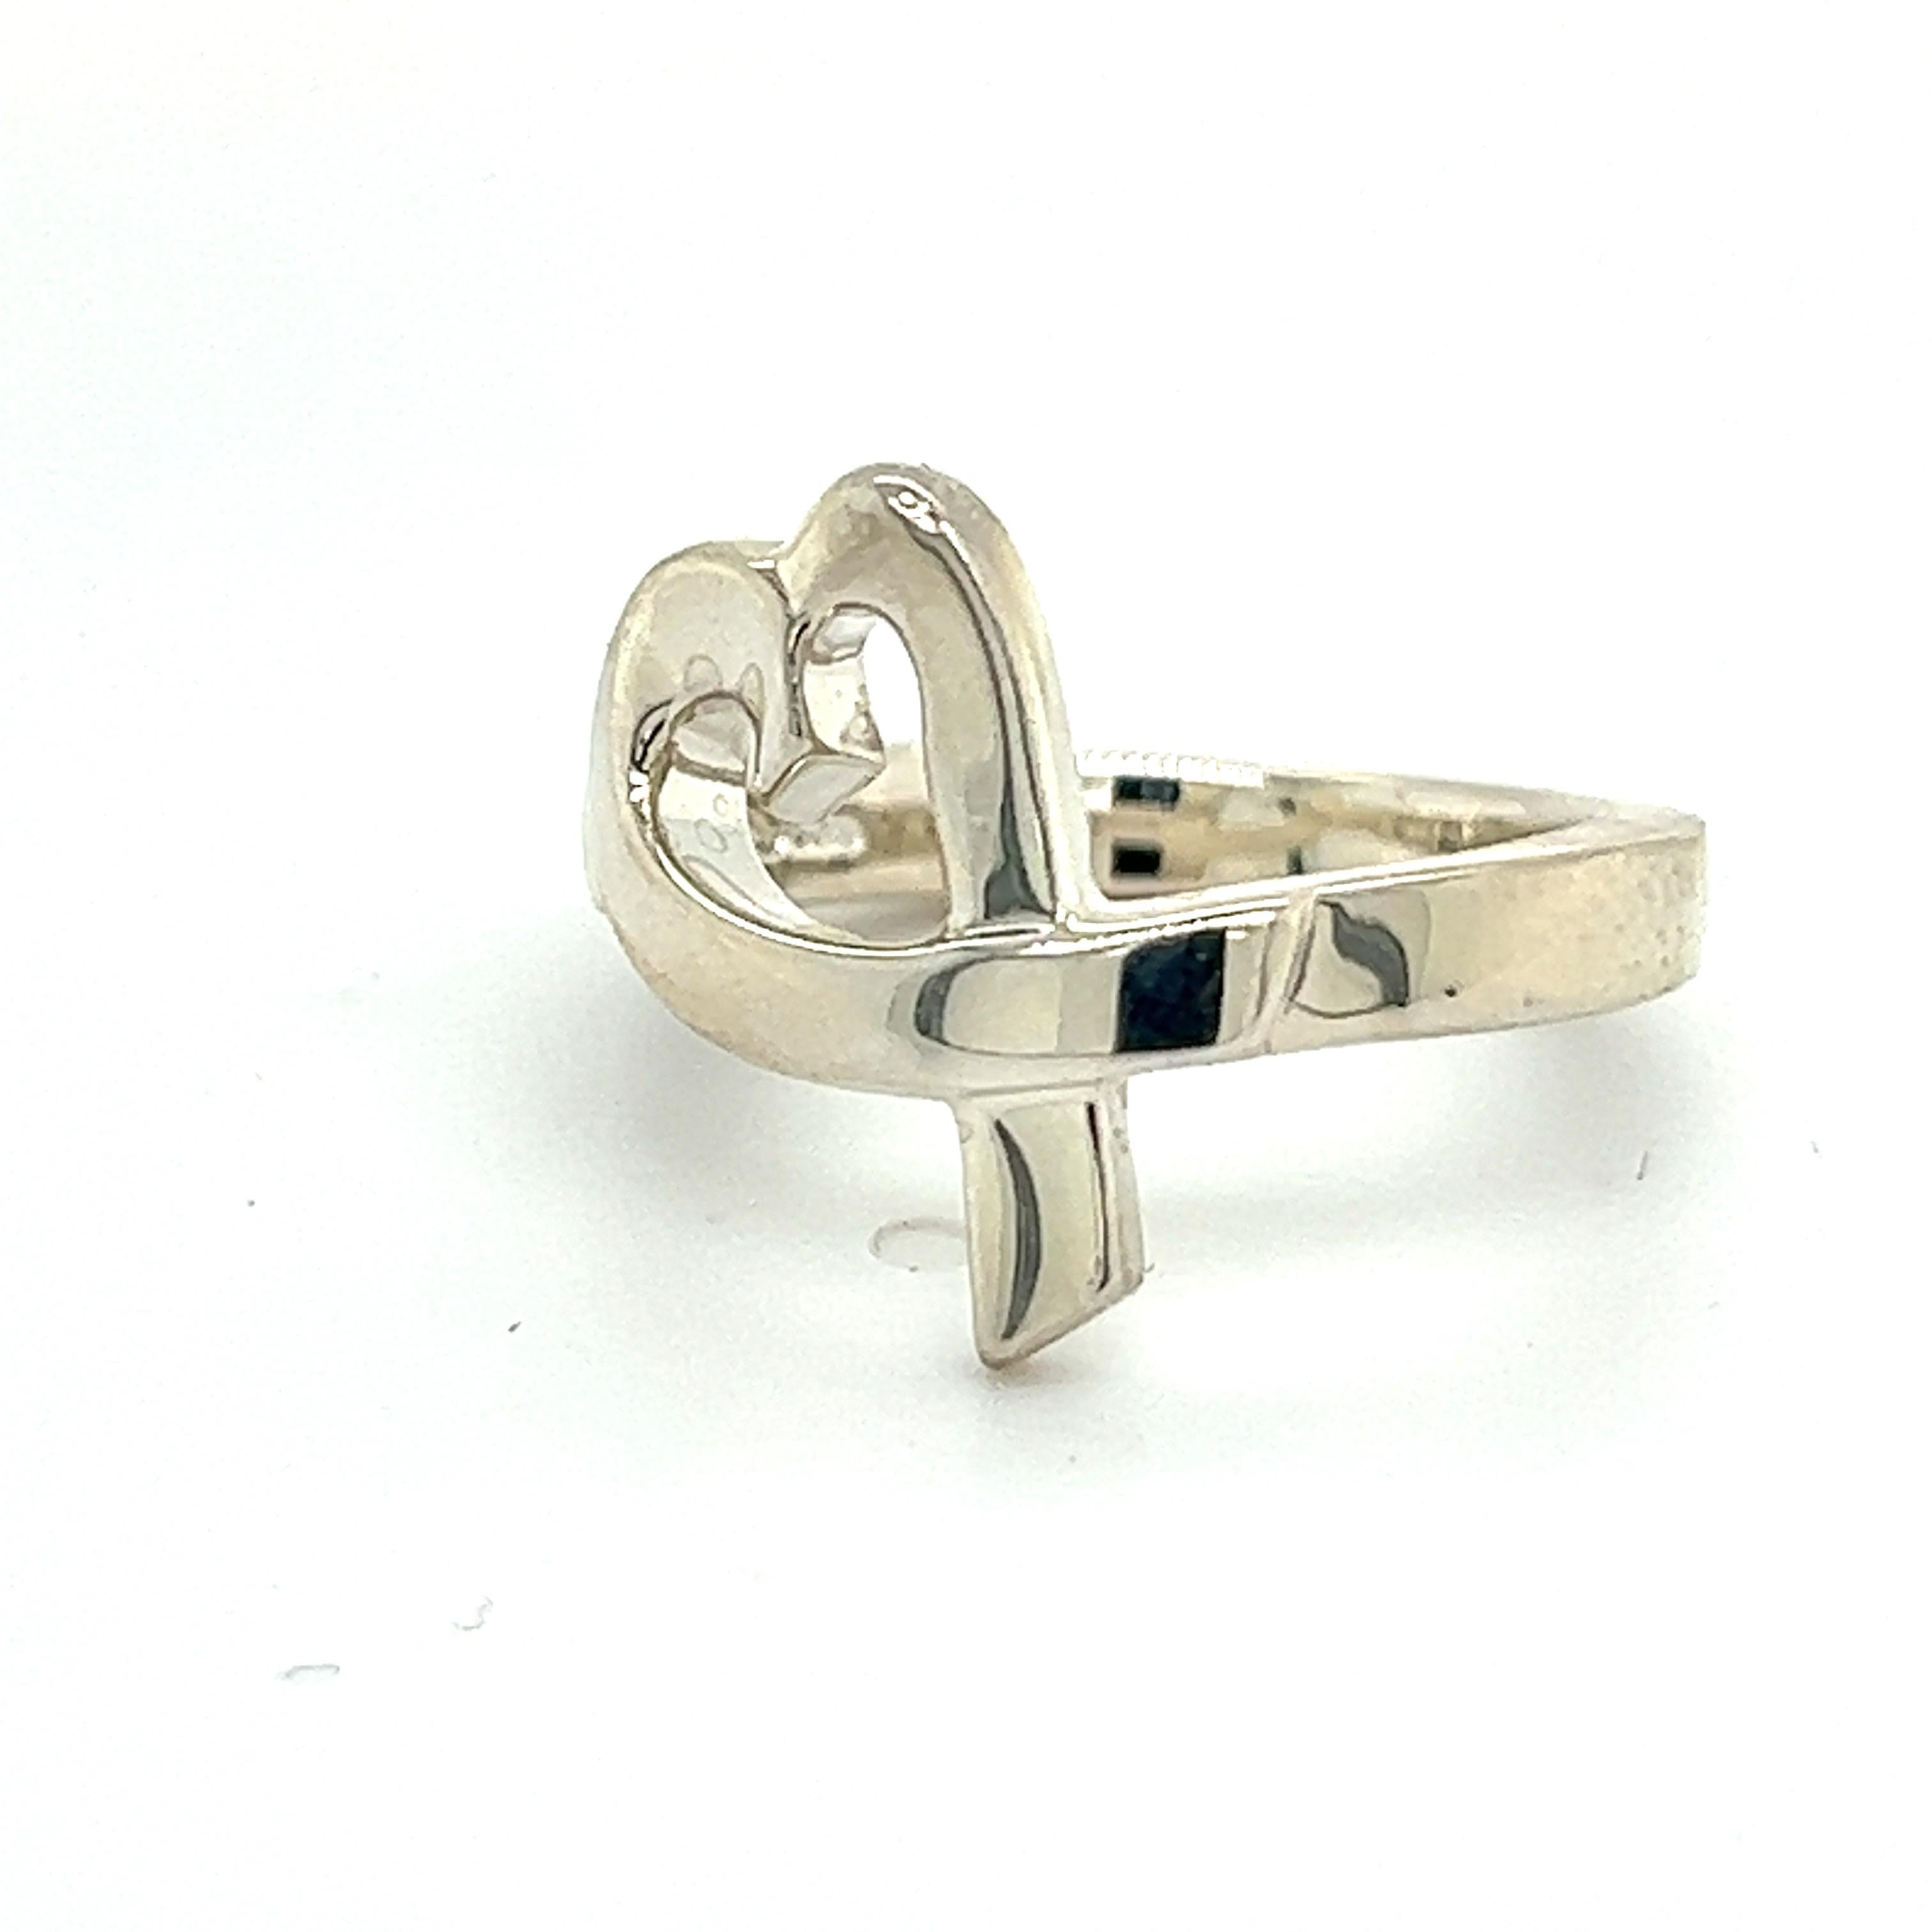 Tiffany & Co Estate Heart Ring Size 4.75 Sterling Silver TIF274

TRUSTED SELLER SINCE 2002

PLEASE SEE OUR HUNDREDS OF POSITIVE FEEDBACKS FROM OUR CLIENTS!!

FREE SHIPPING

DETAILS
Style: Heart
Size: 4.75
Metal: Sterling Silver
Weight: 4.35